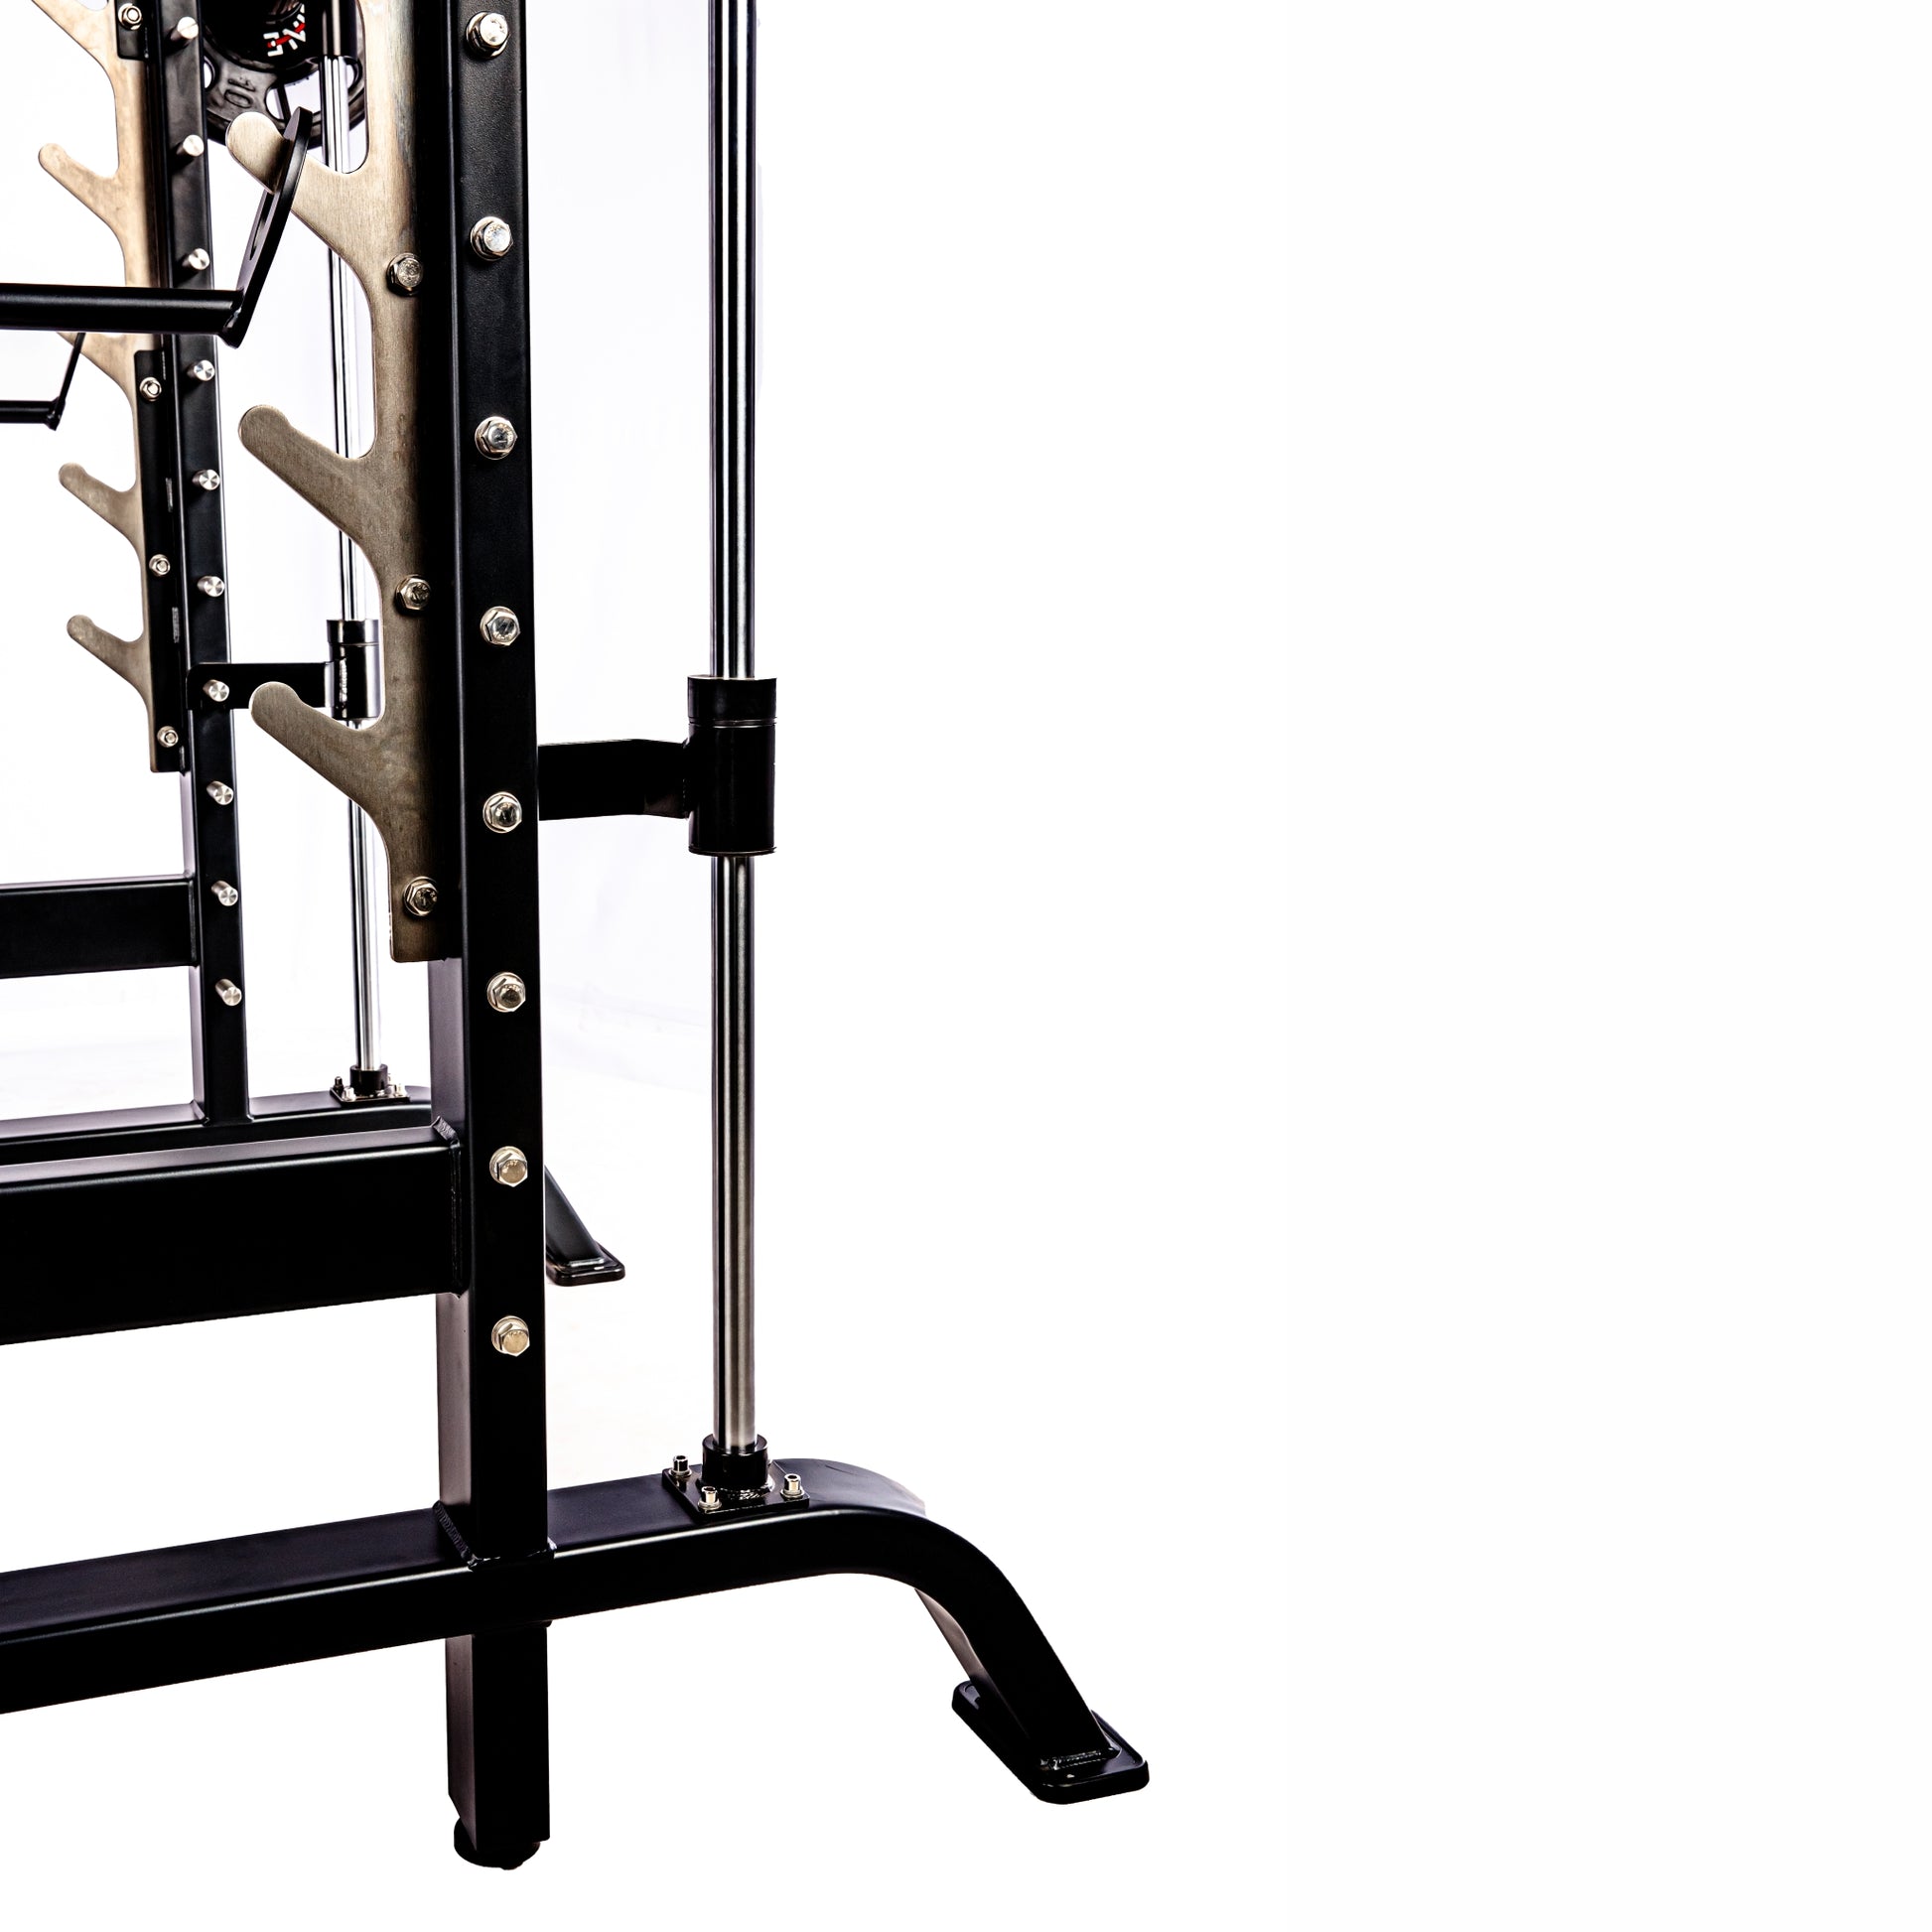 MV-20A - SMITH MACHINE WITH SQUAT RACK - Fitline India